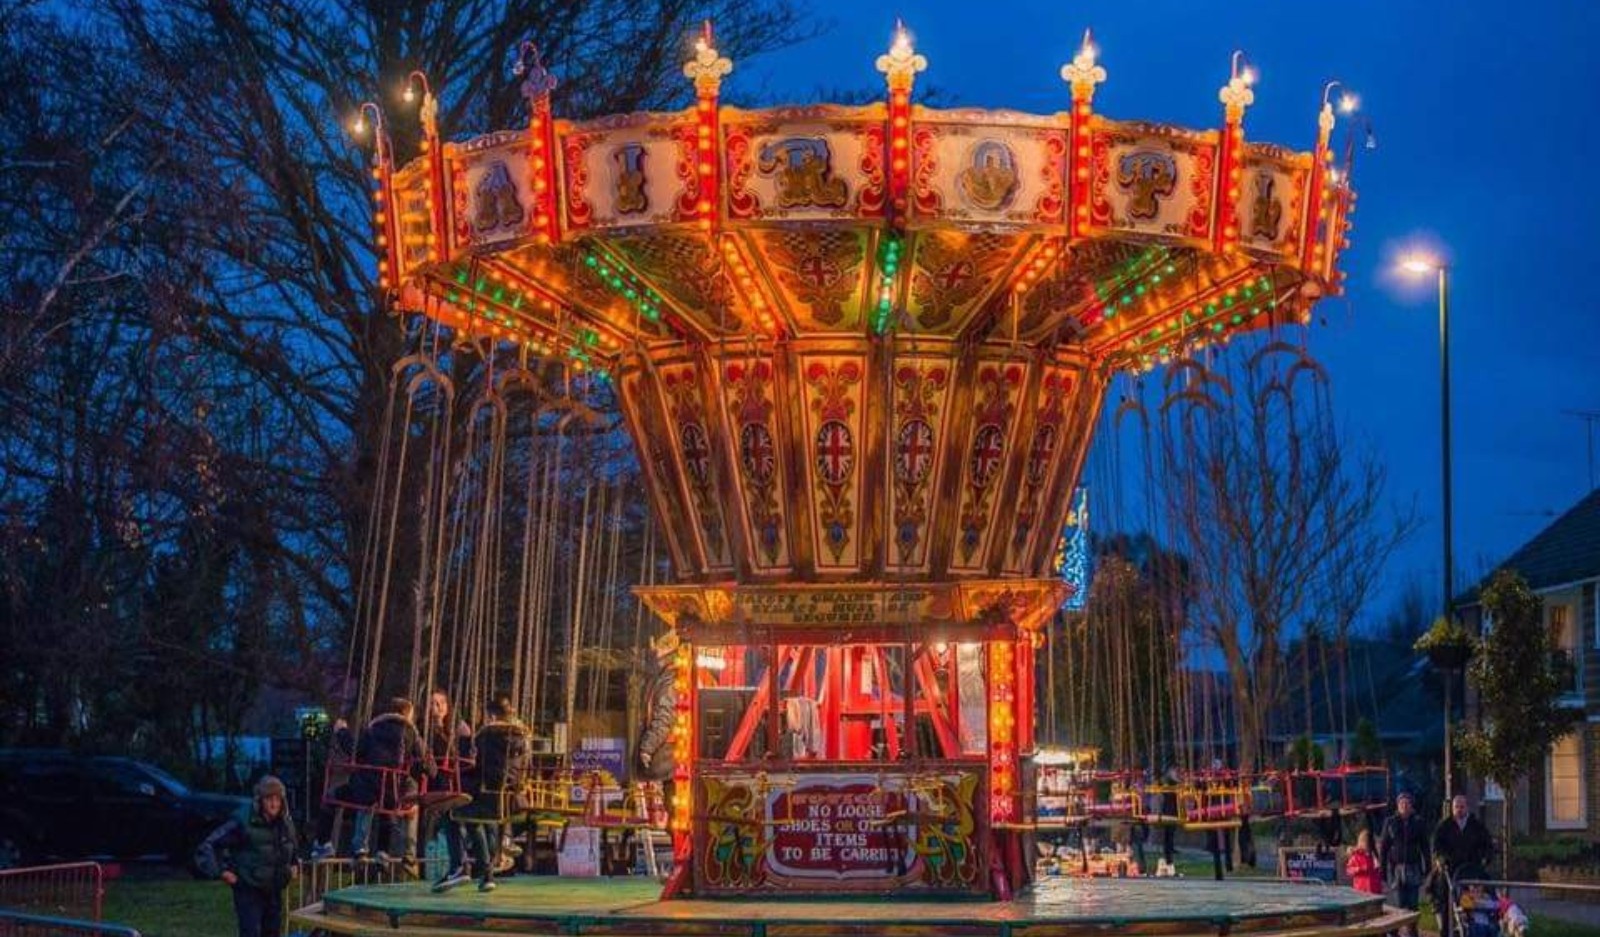 An illuminated vintage carousel at twilight with people nearby in a festive setting